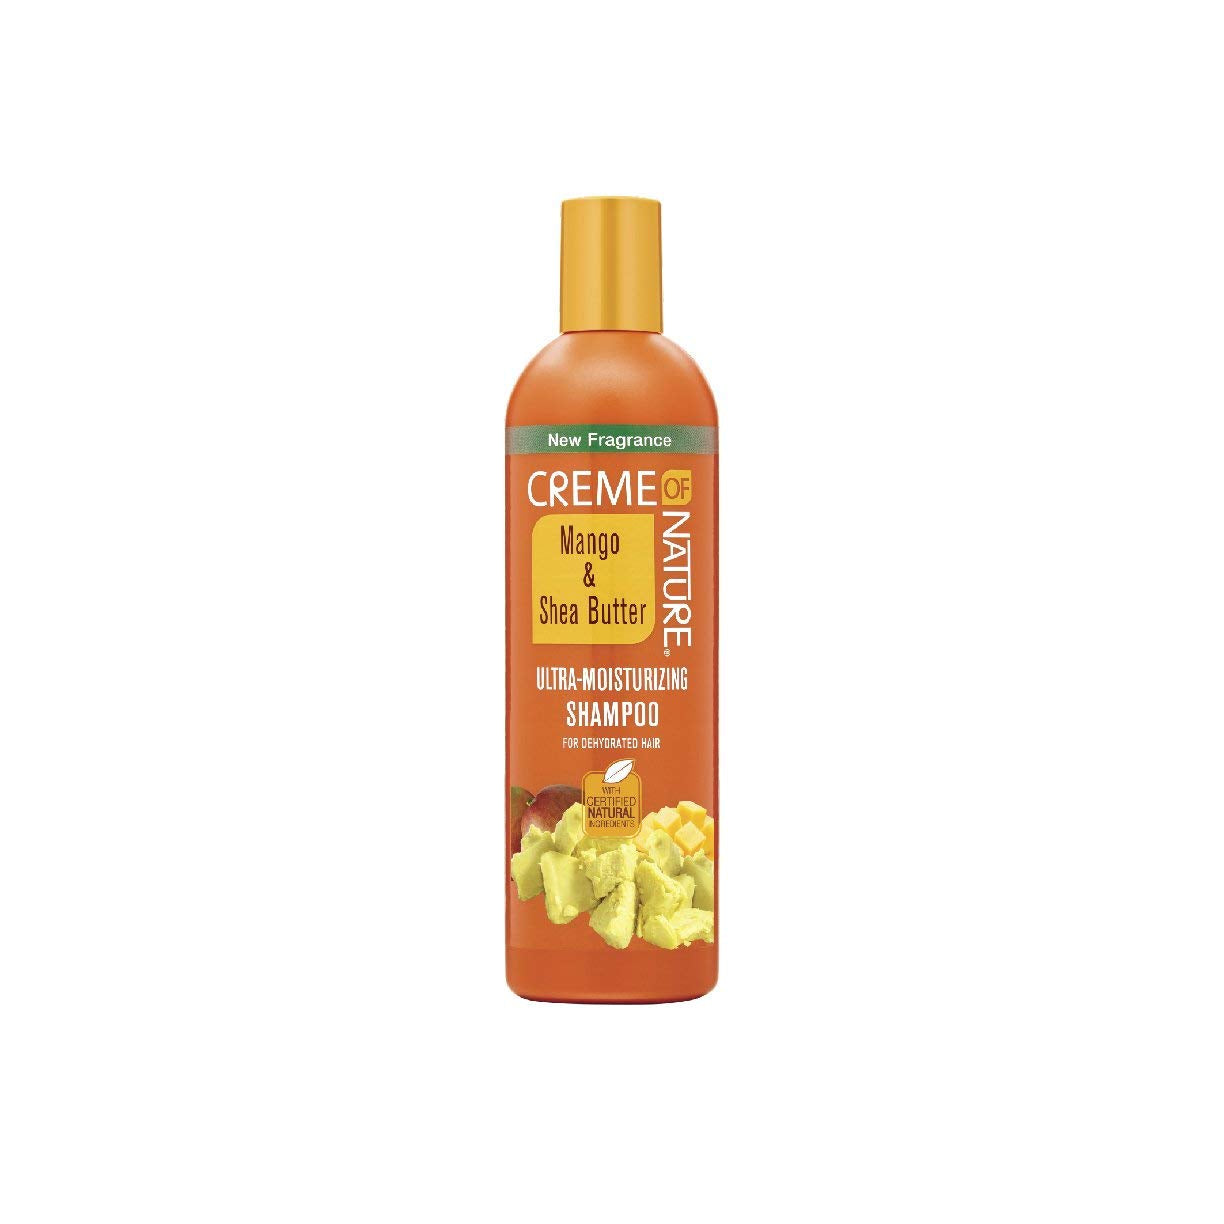 Creme of Nature Shampoo with Mango & Shea Butter, Ultra Moisturizing for Dry Dehydrated Hair, 12 Fl Oz (RR21931)